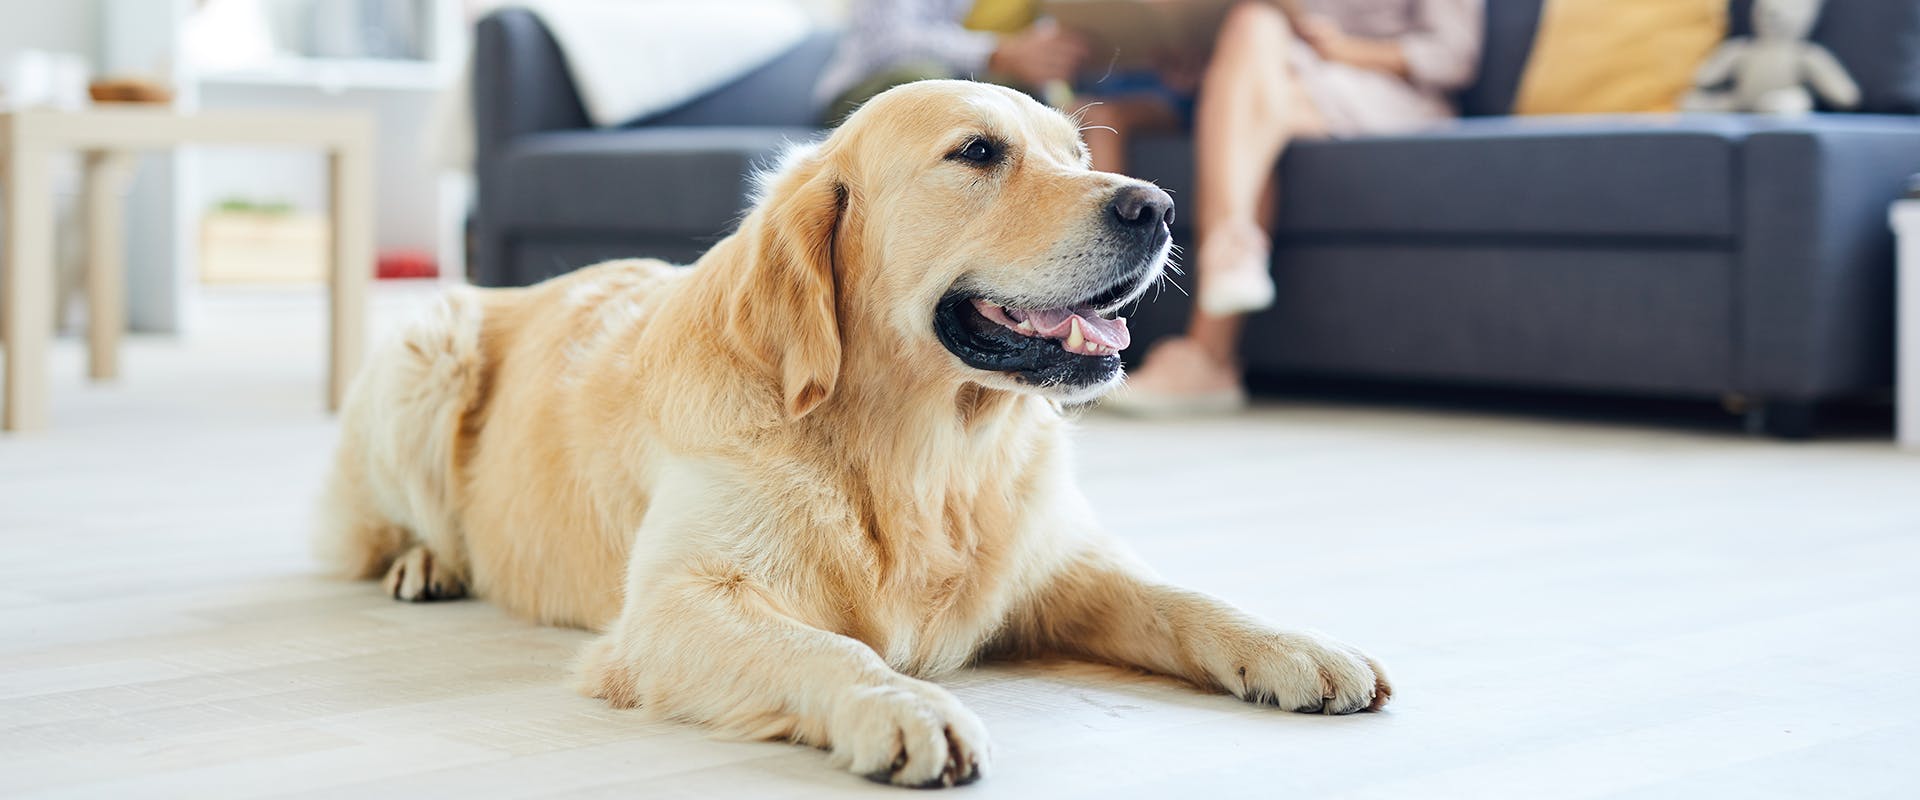 A Golden Retriever sitting on a hardwood floor, a family sitting on a sofa in the background